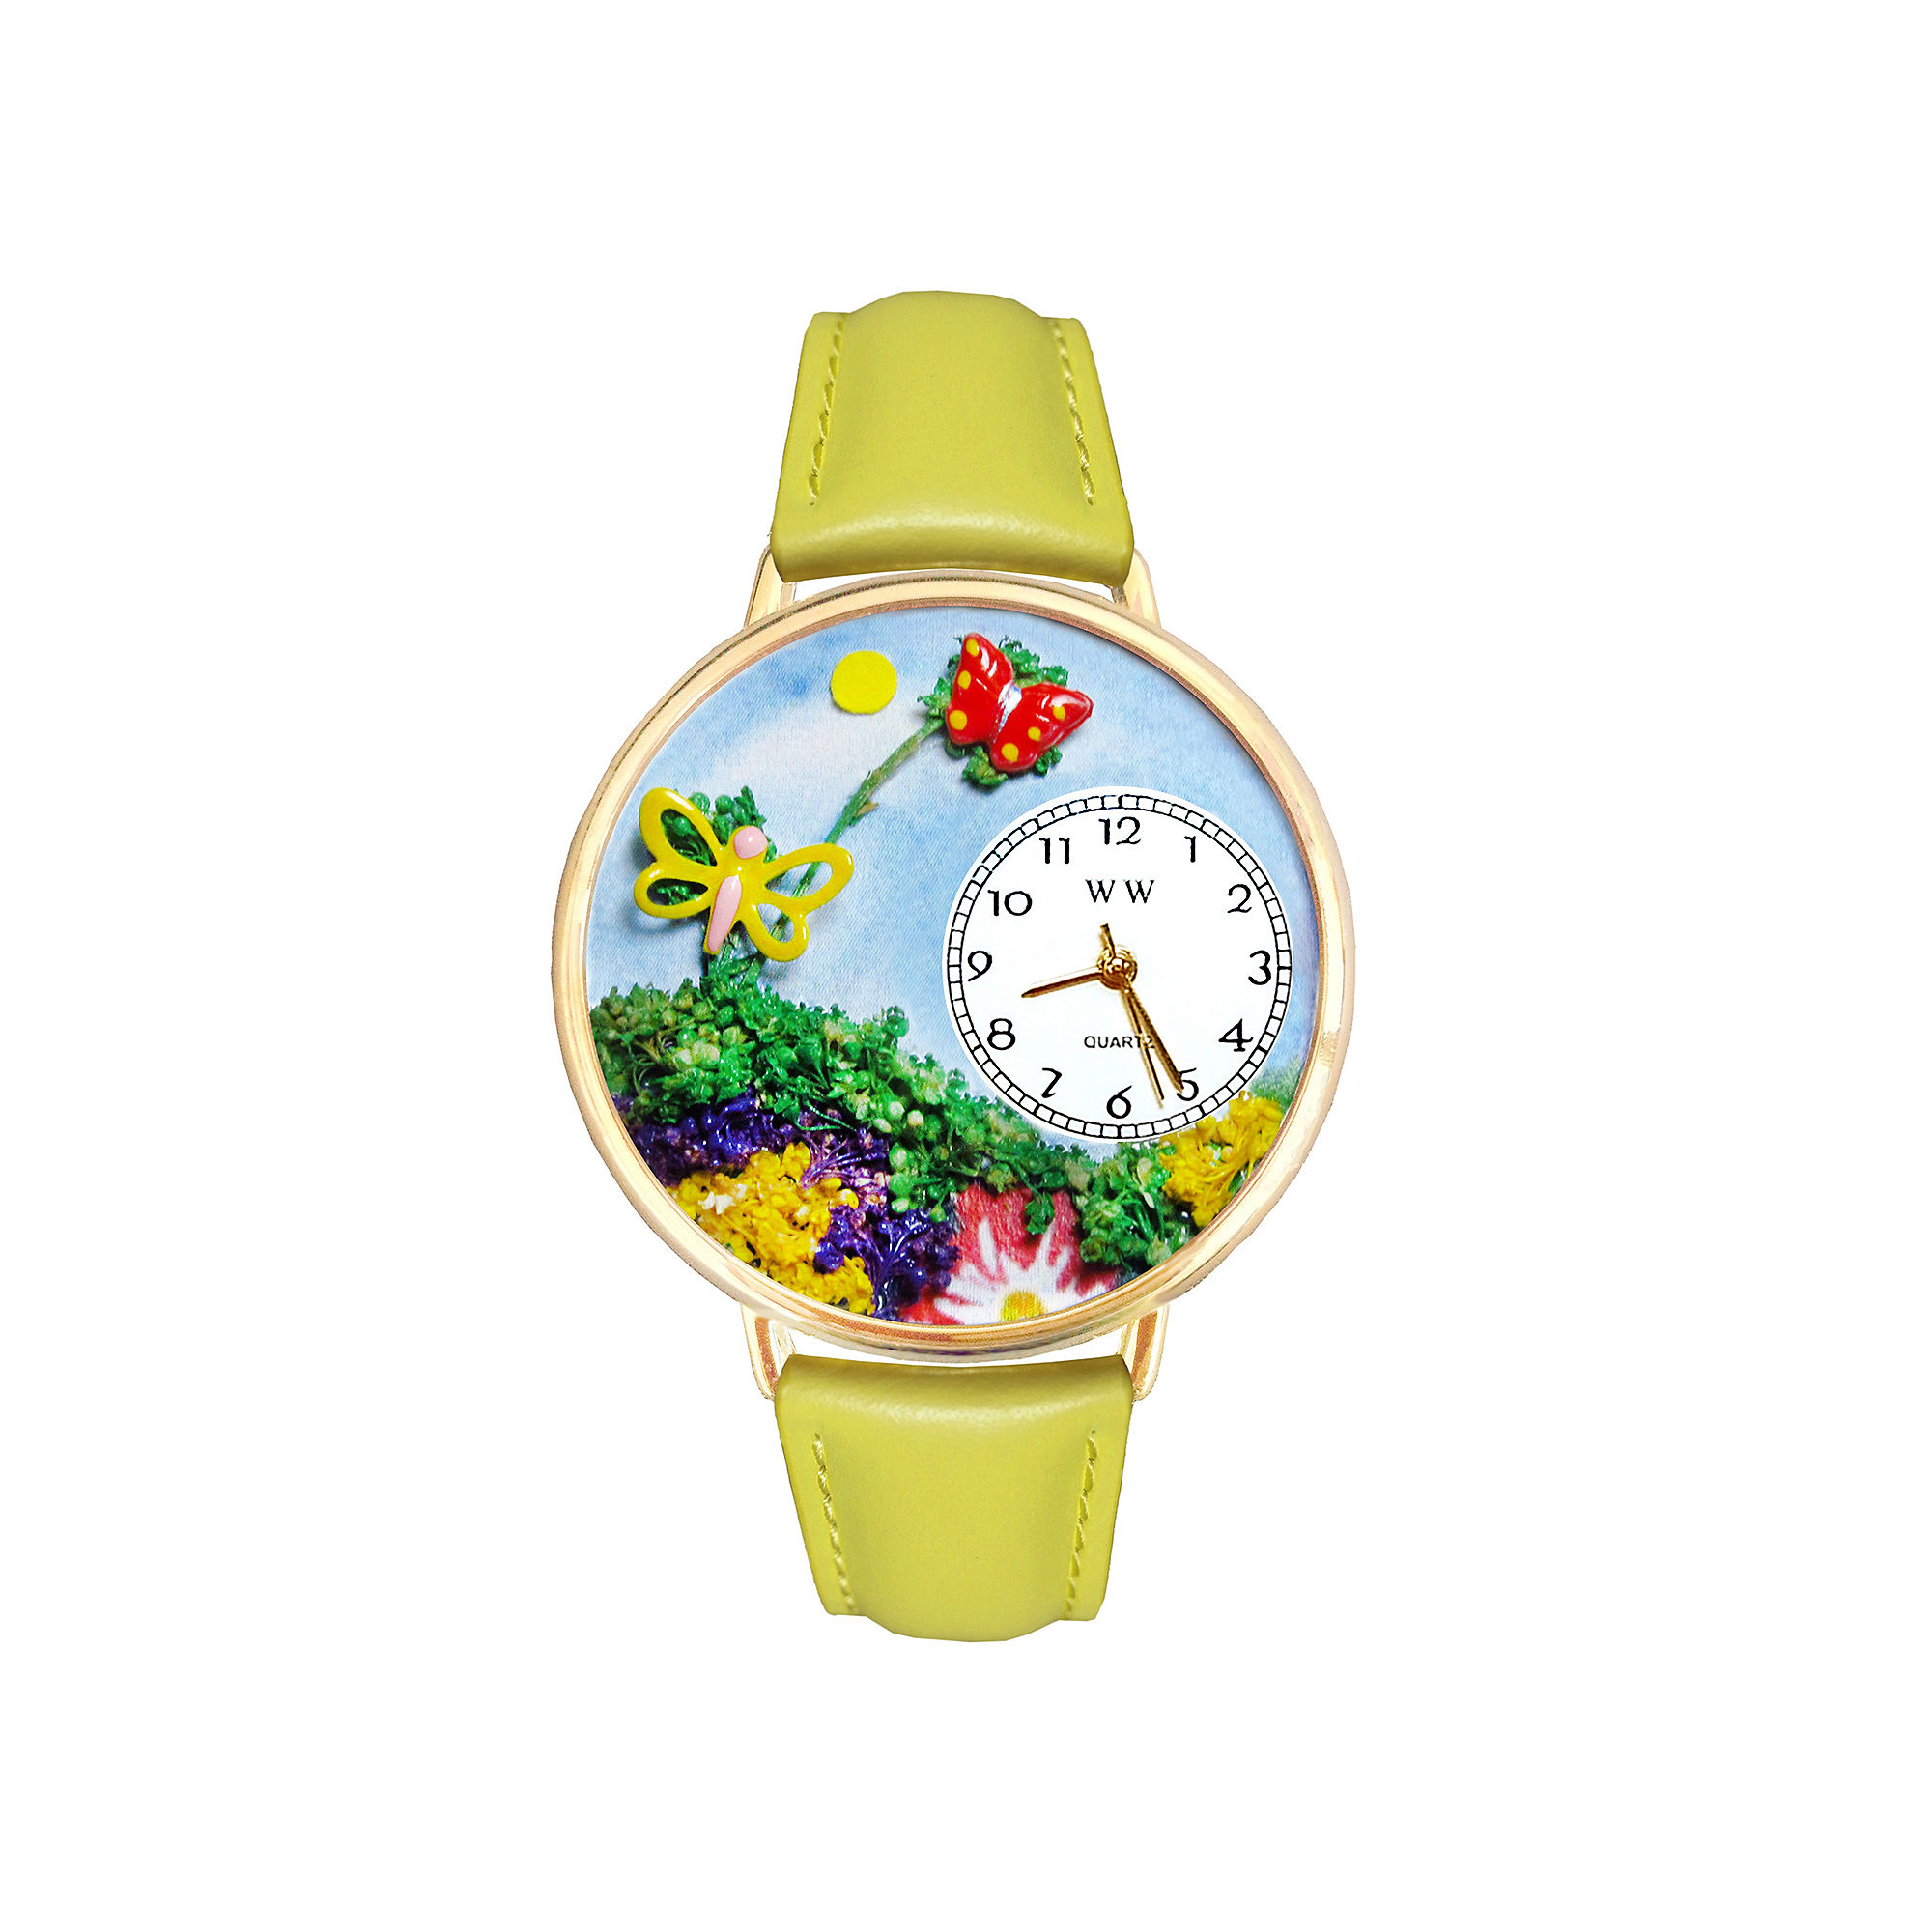 Whimsical Watches Personalized Butterfly Womens Gold-Tone Bezel Yellow Leather Strap Watch